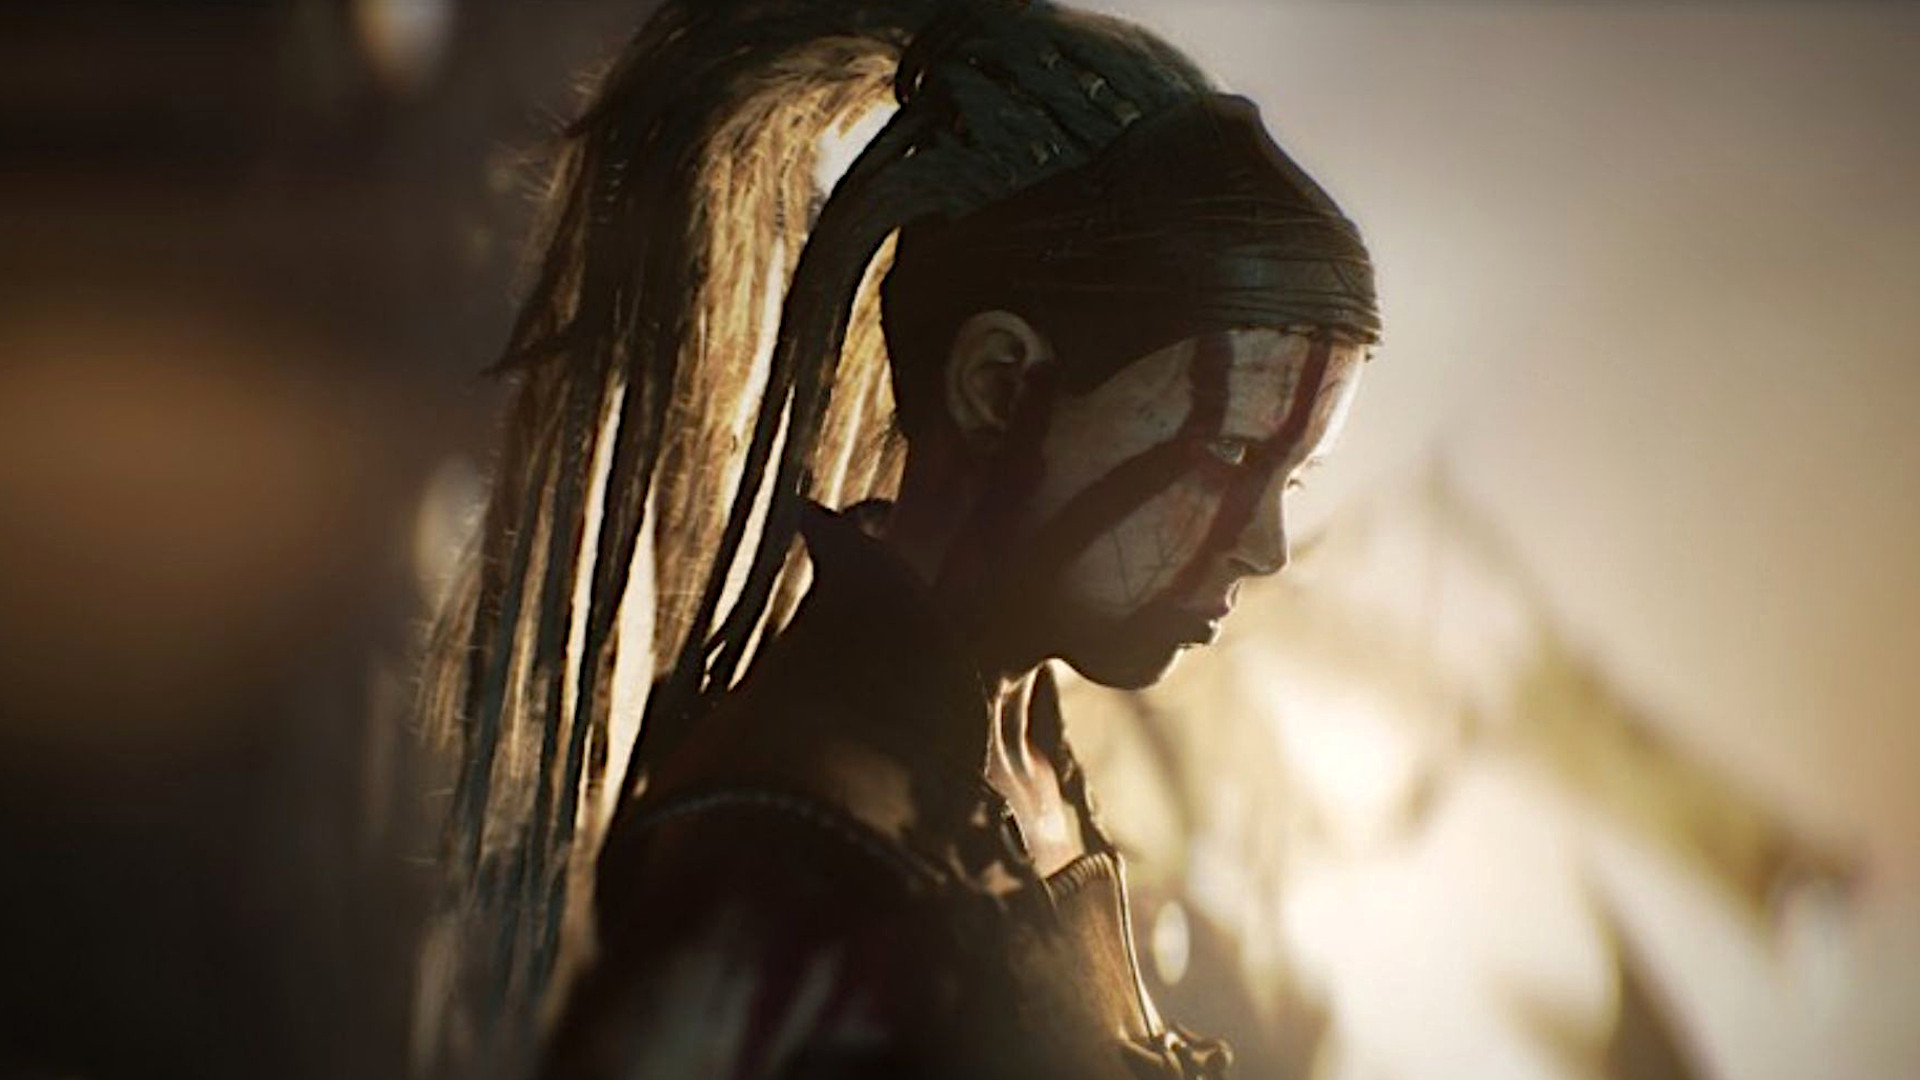 New Hellblade 2 trailer will spook Xbox players in more ways than one